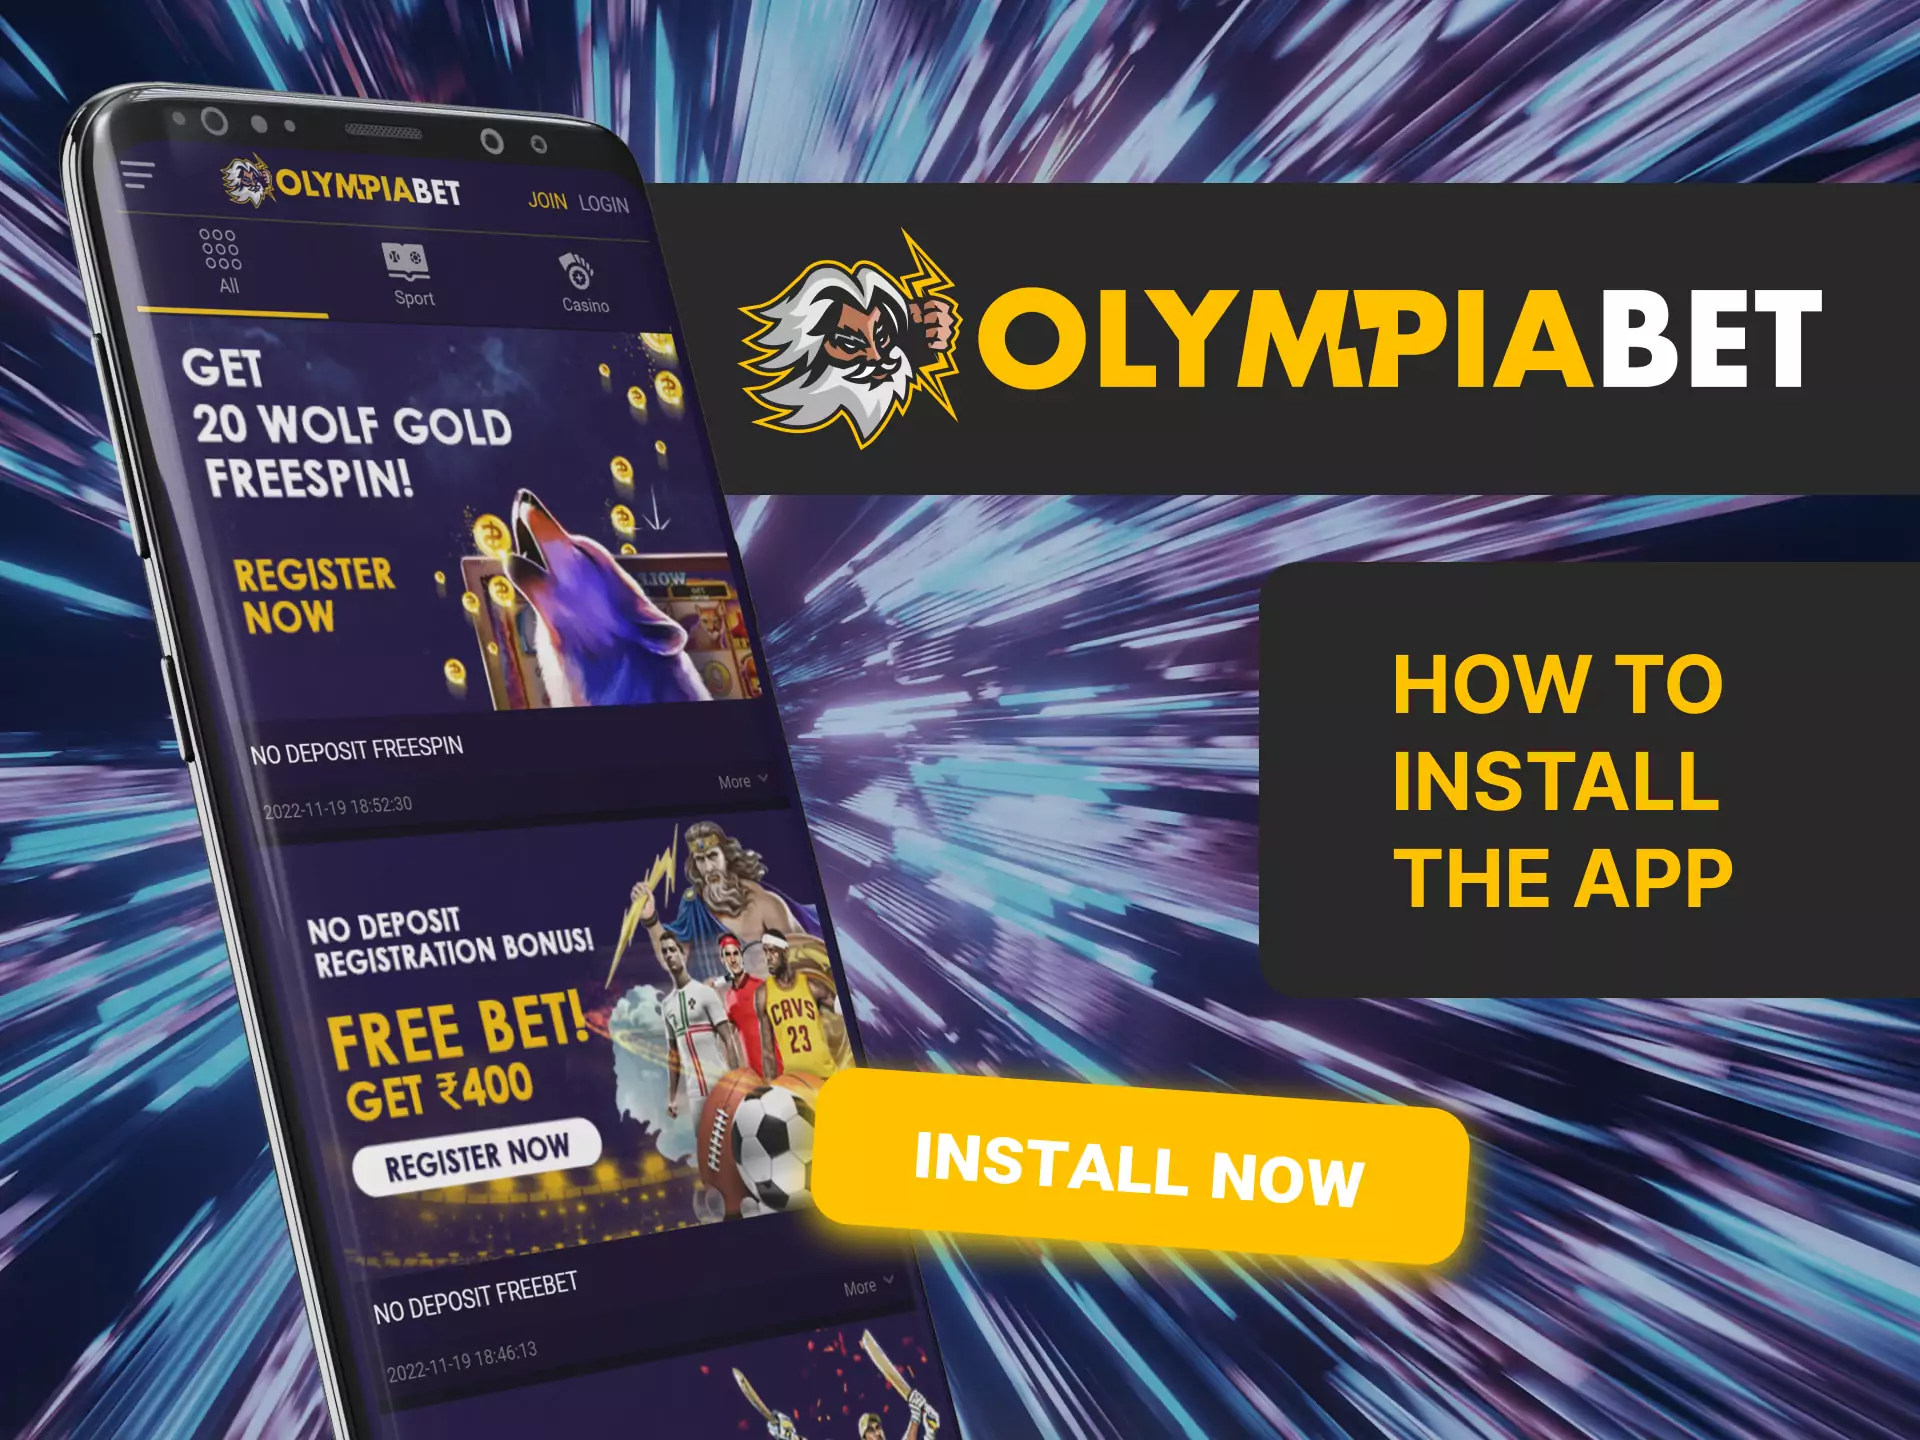 With this instruction, install the OlympiaBet application on your device.